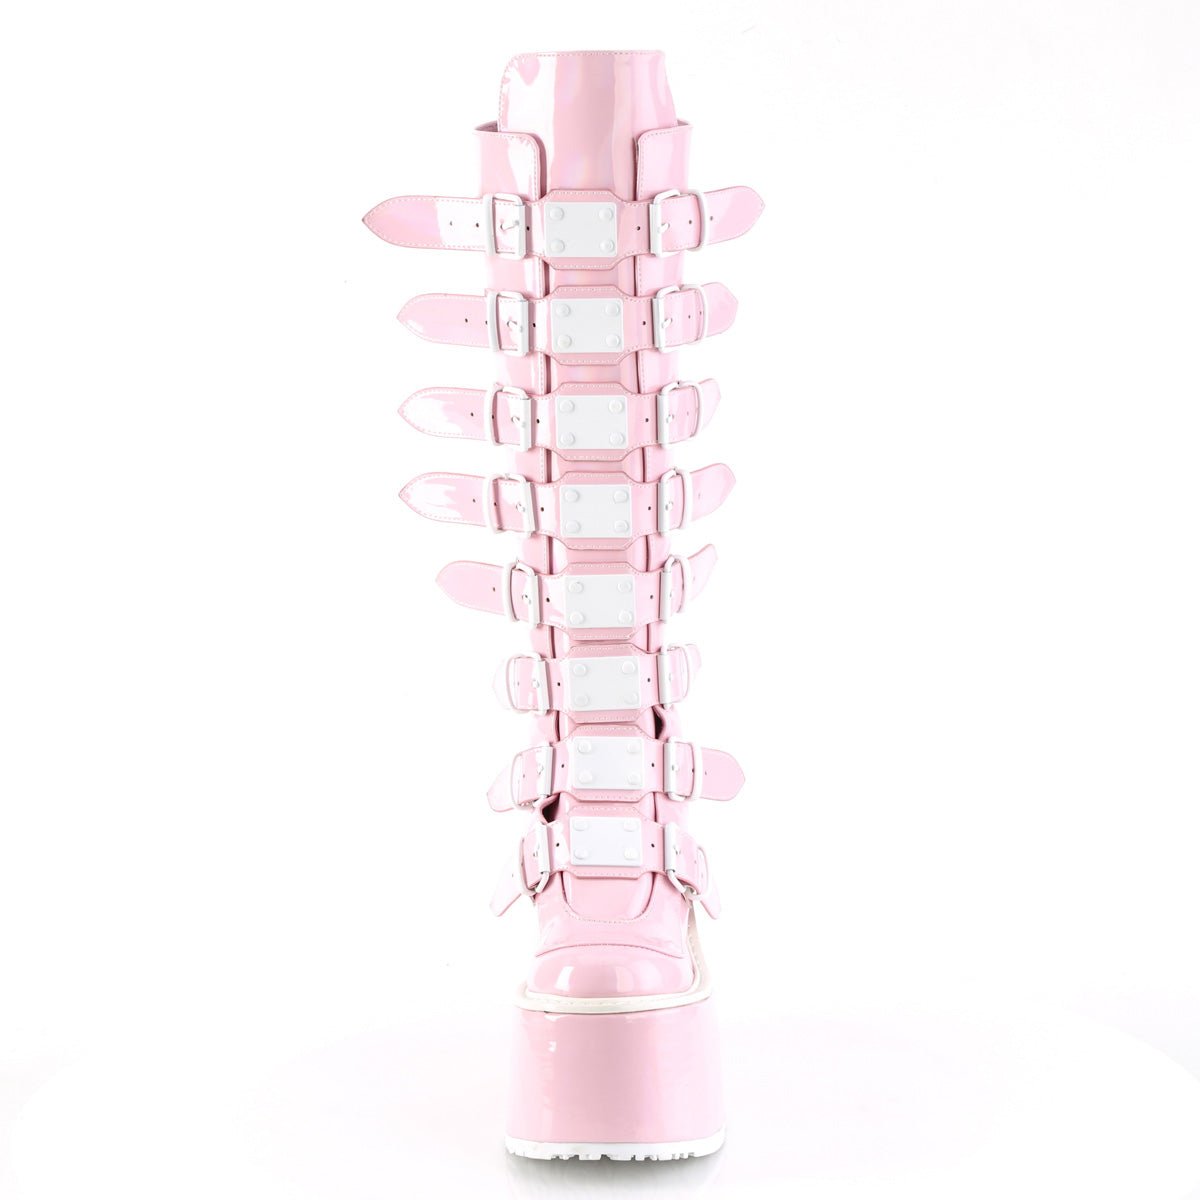 Too Fast | Demonia SWING-815 Baby Pink Hologram Knee High Boots